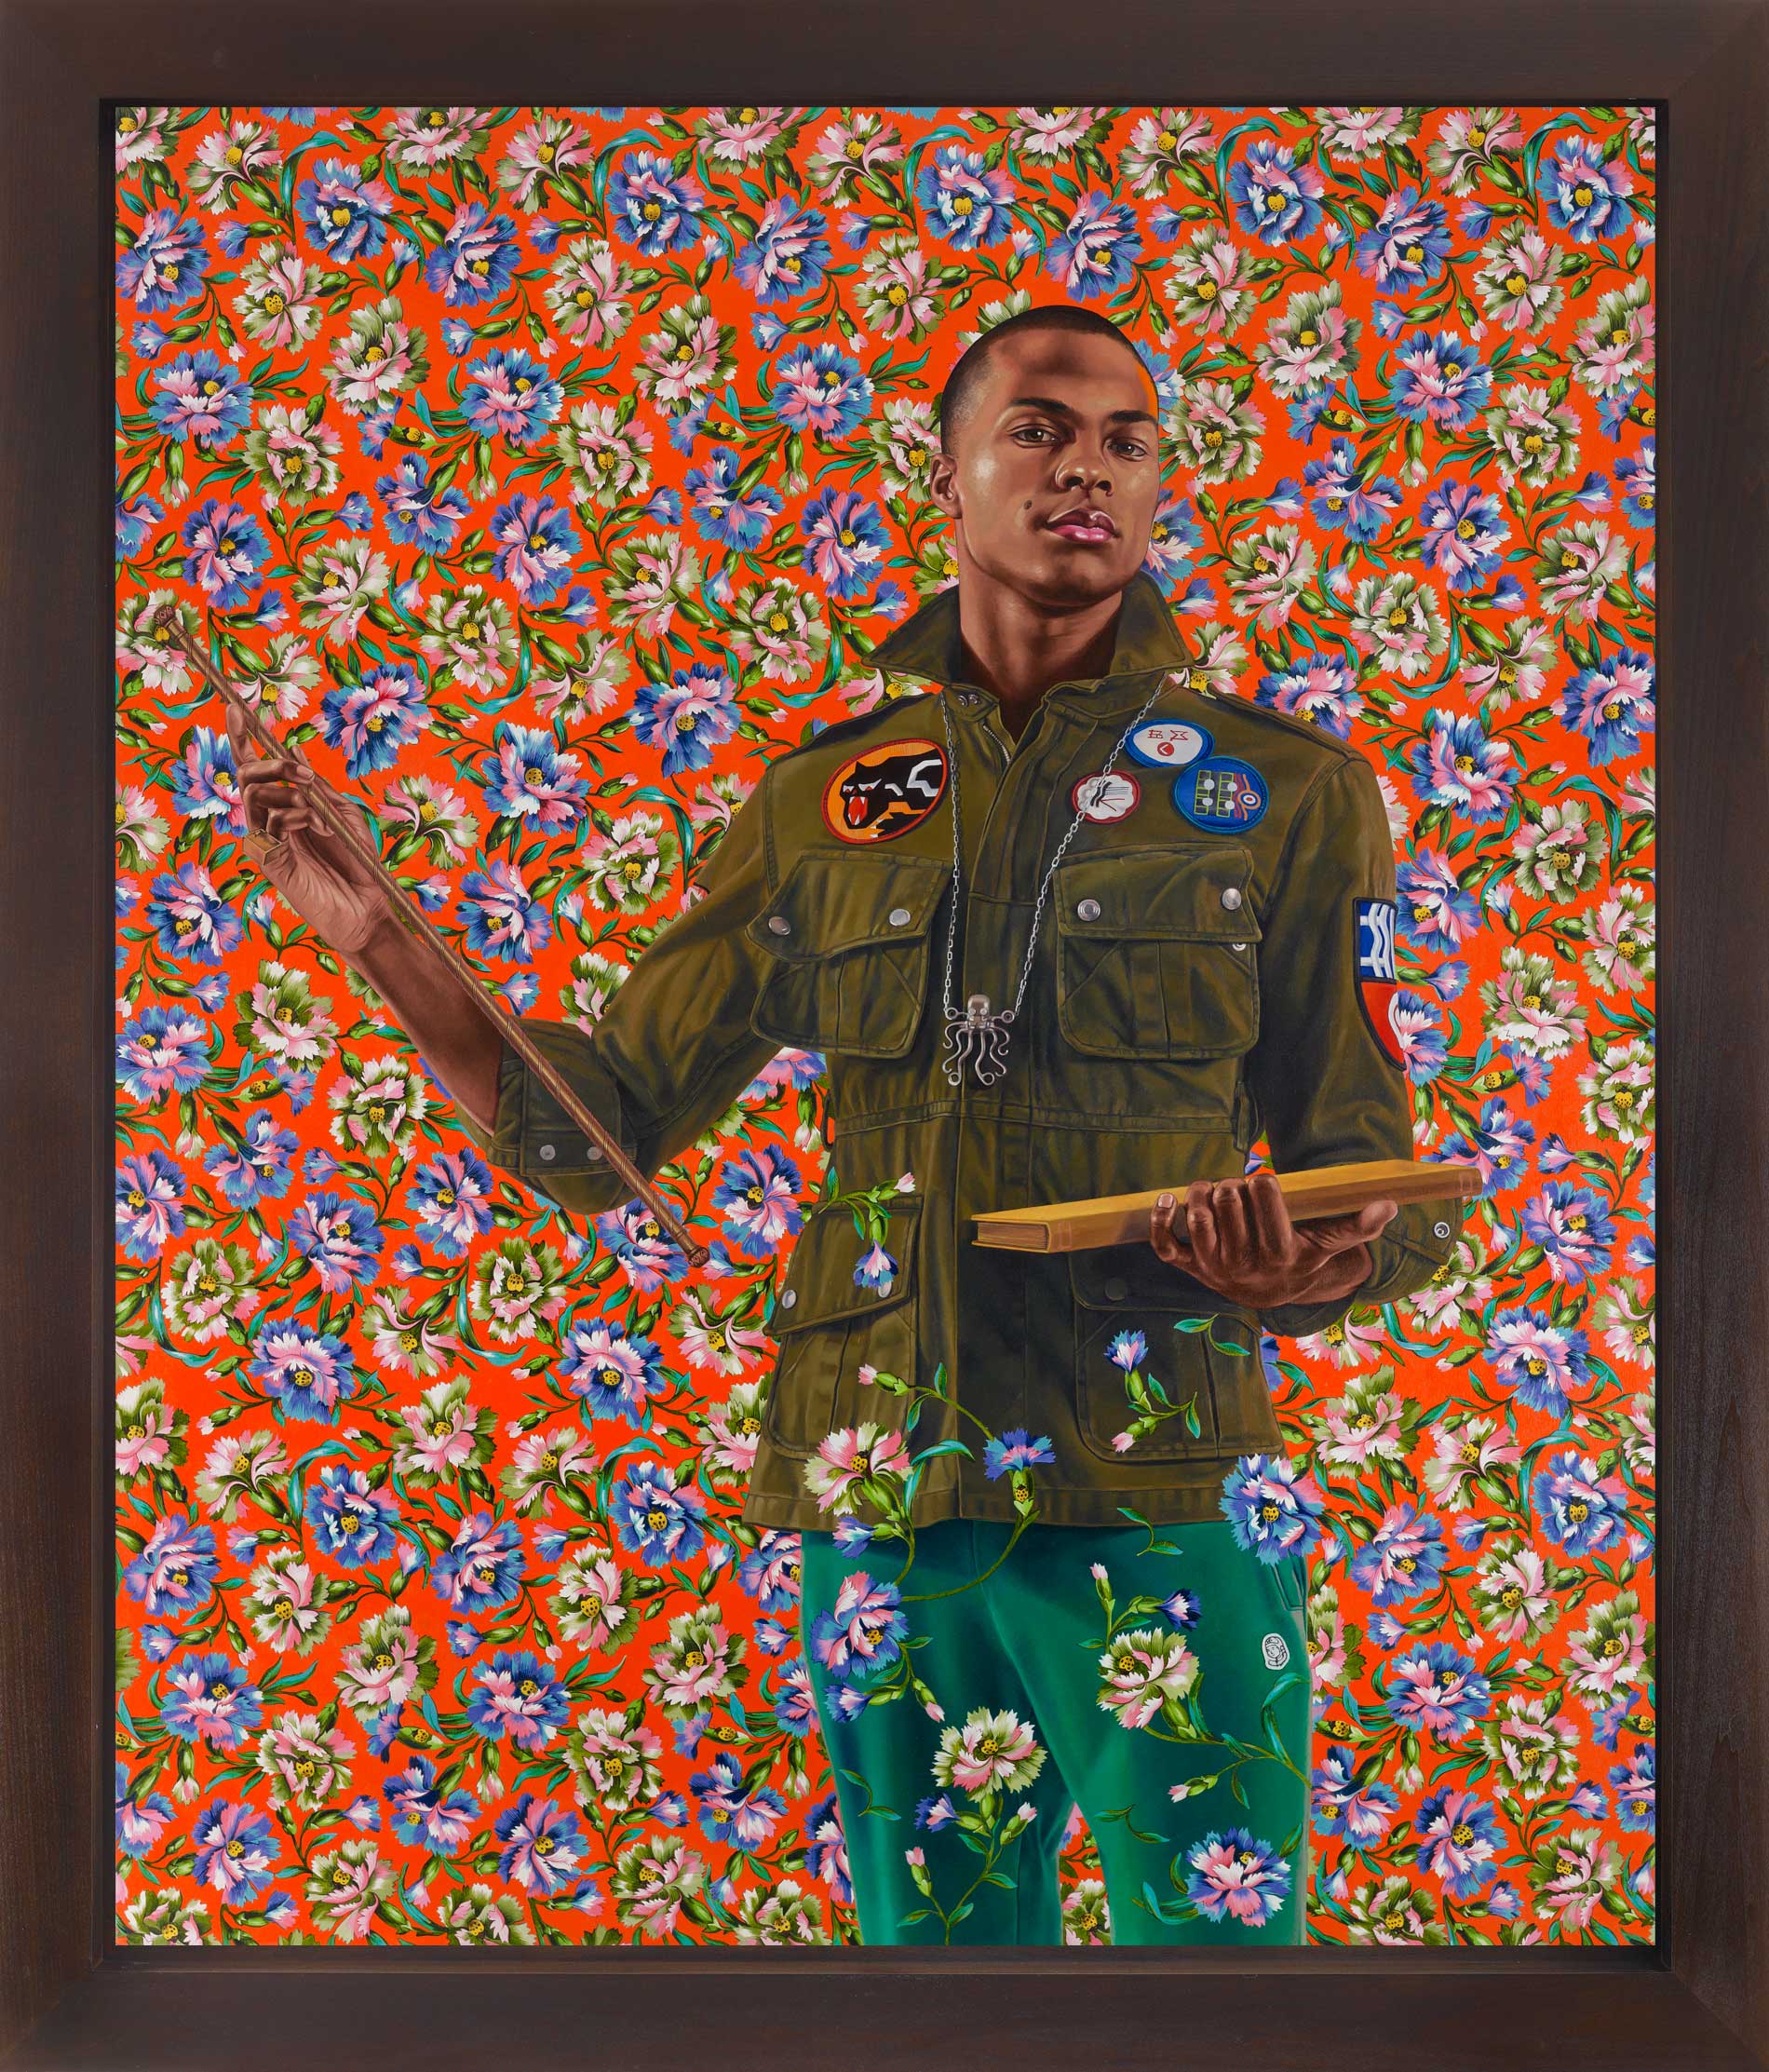 Kehinde Wiley | Selected Works: 2013 | Anthony of Padua, 2013, Oil on Canvas. | 6